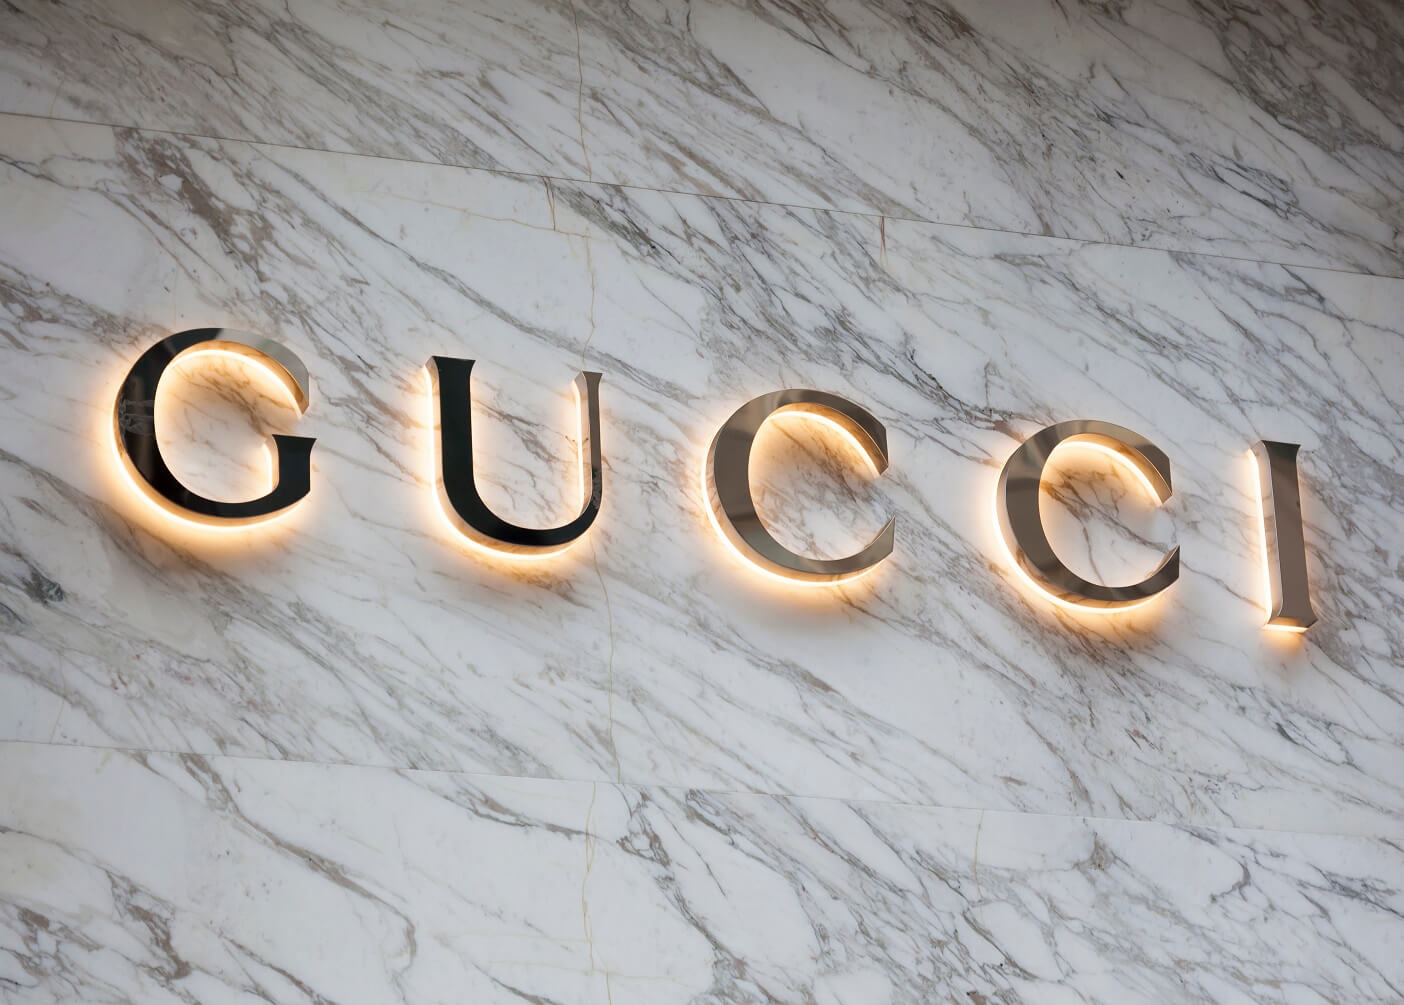 Luxury Brand Gucci Collaborates with Bored Ape Creator Yuga Labs for Metaverse Project – Crypto Adoption on the Rise?